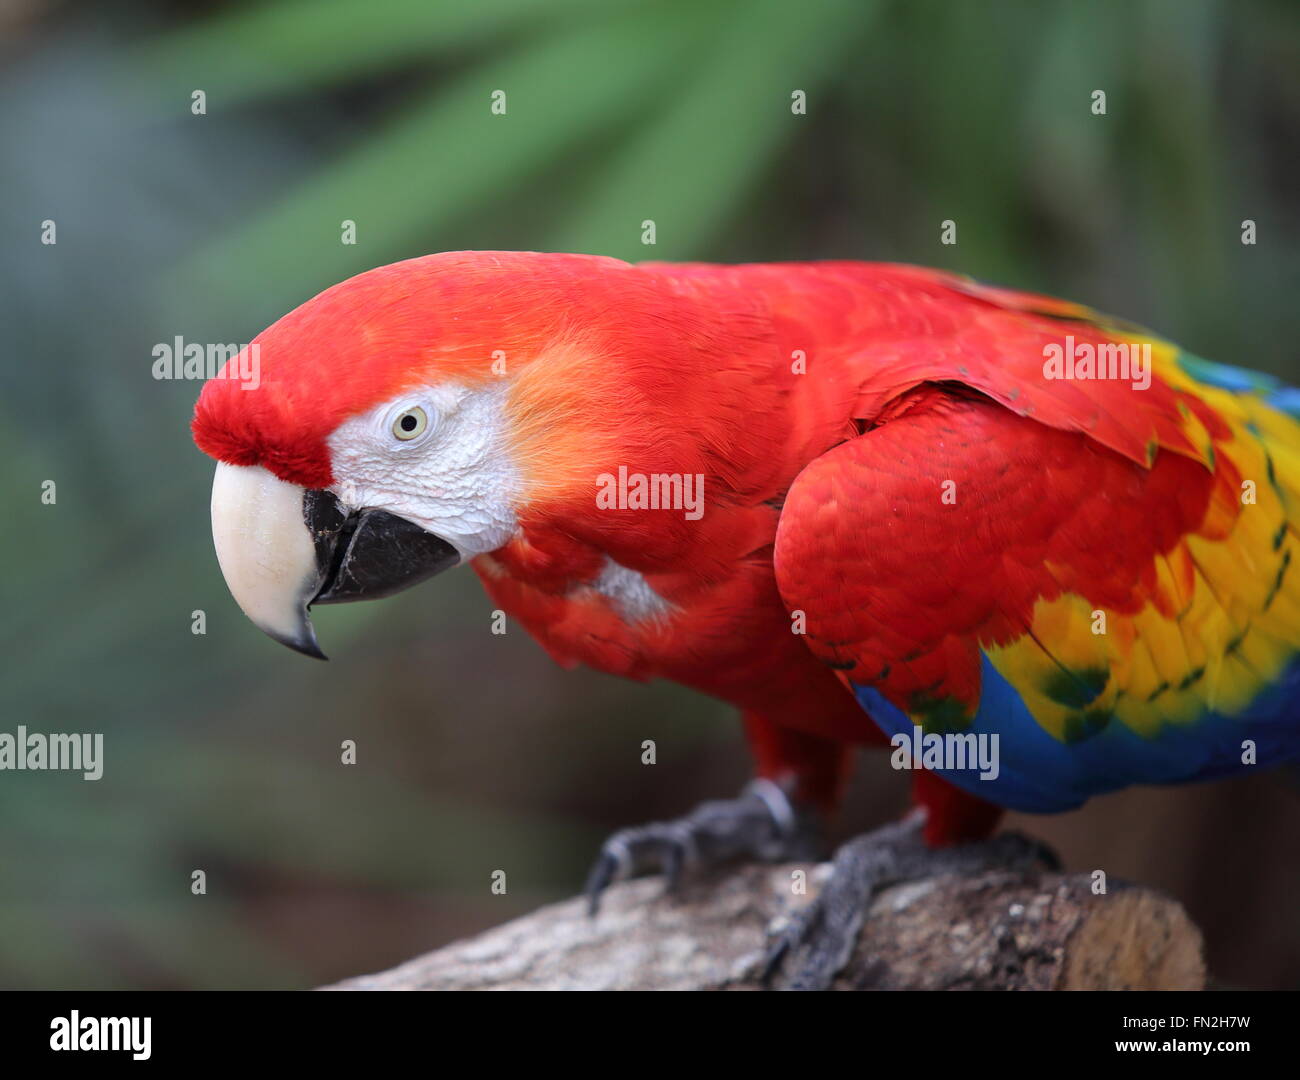 Scarlet red macaw on a branch Stock Photo